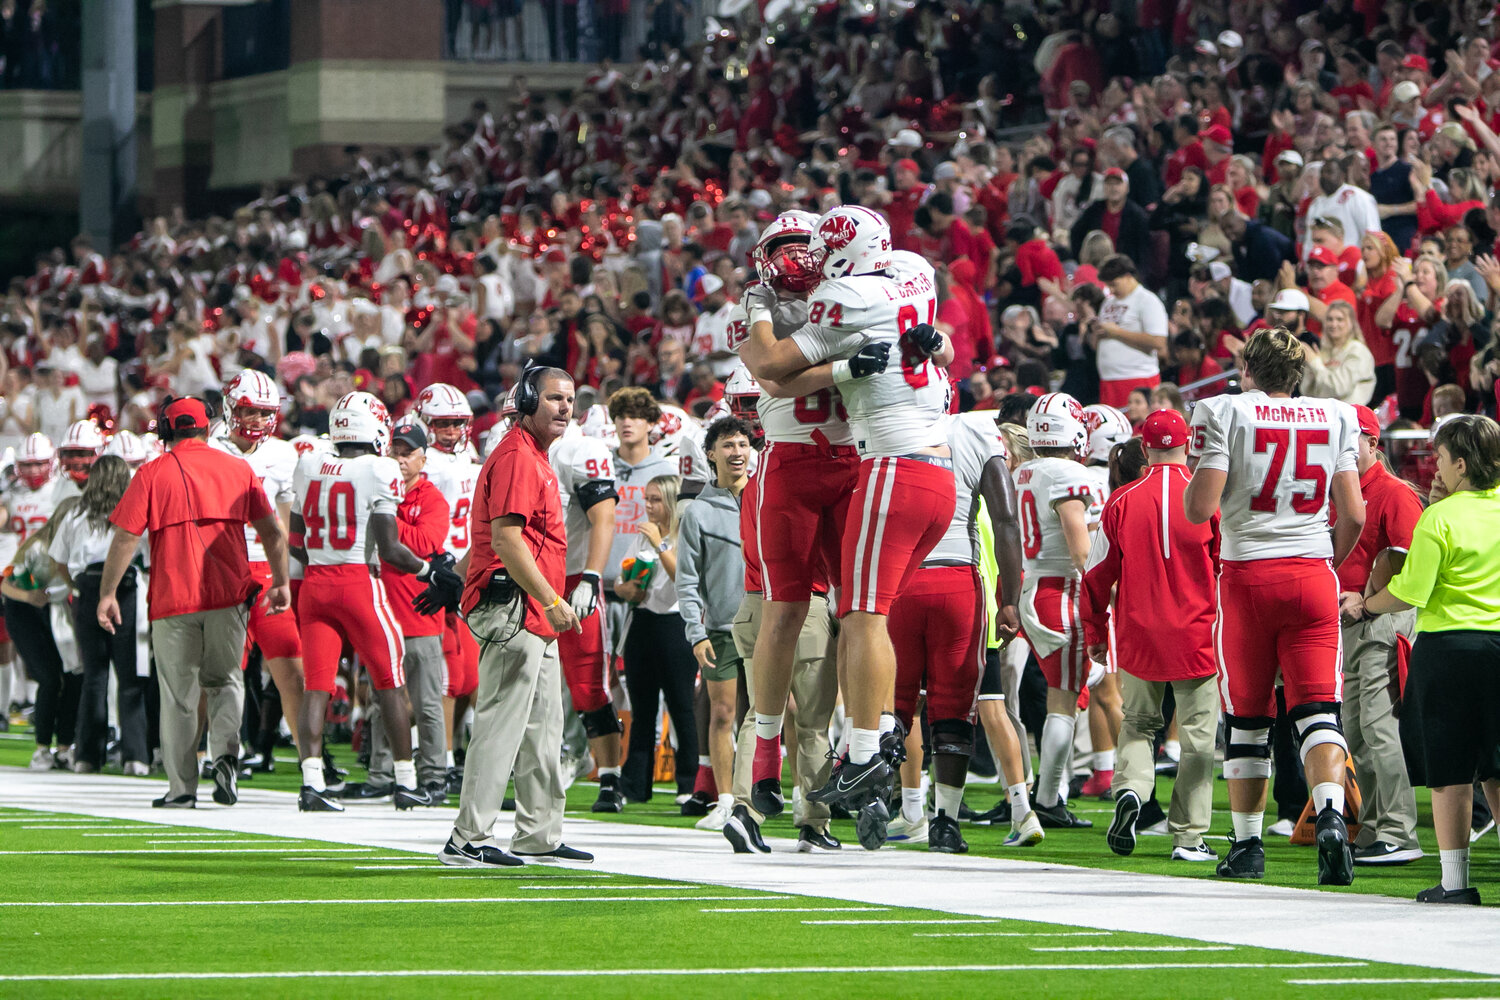 Luke Carter and Colton Sanders celebrate after Carter scored a touchdown during Friday's area round game between Katy and Cy-Fair at the Berry Center in Cypress.